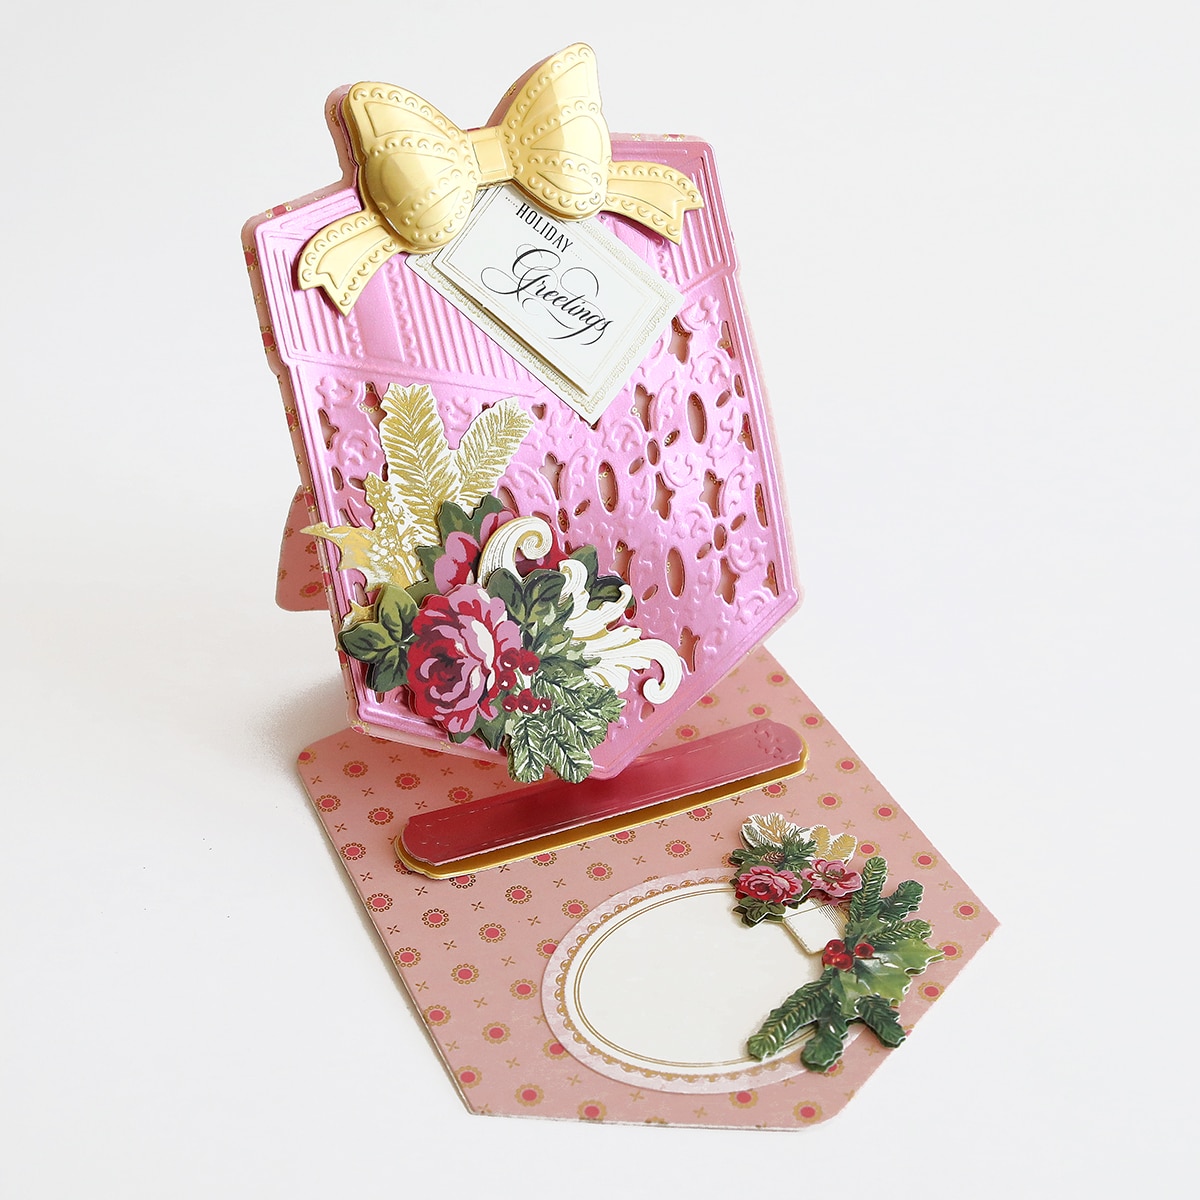 A pink card with holly and bows on it.